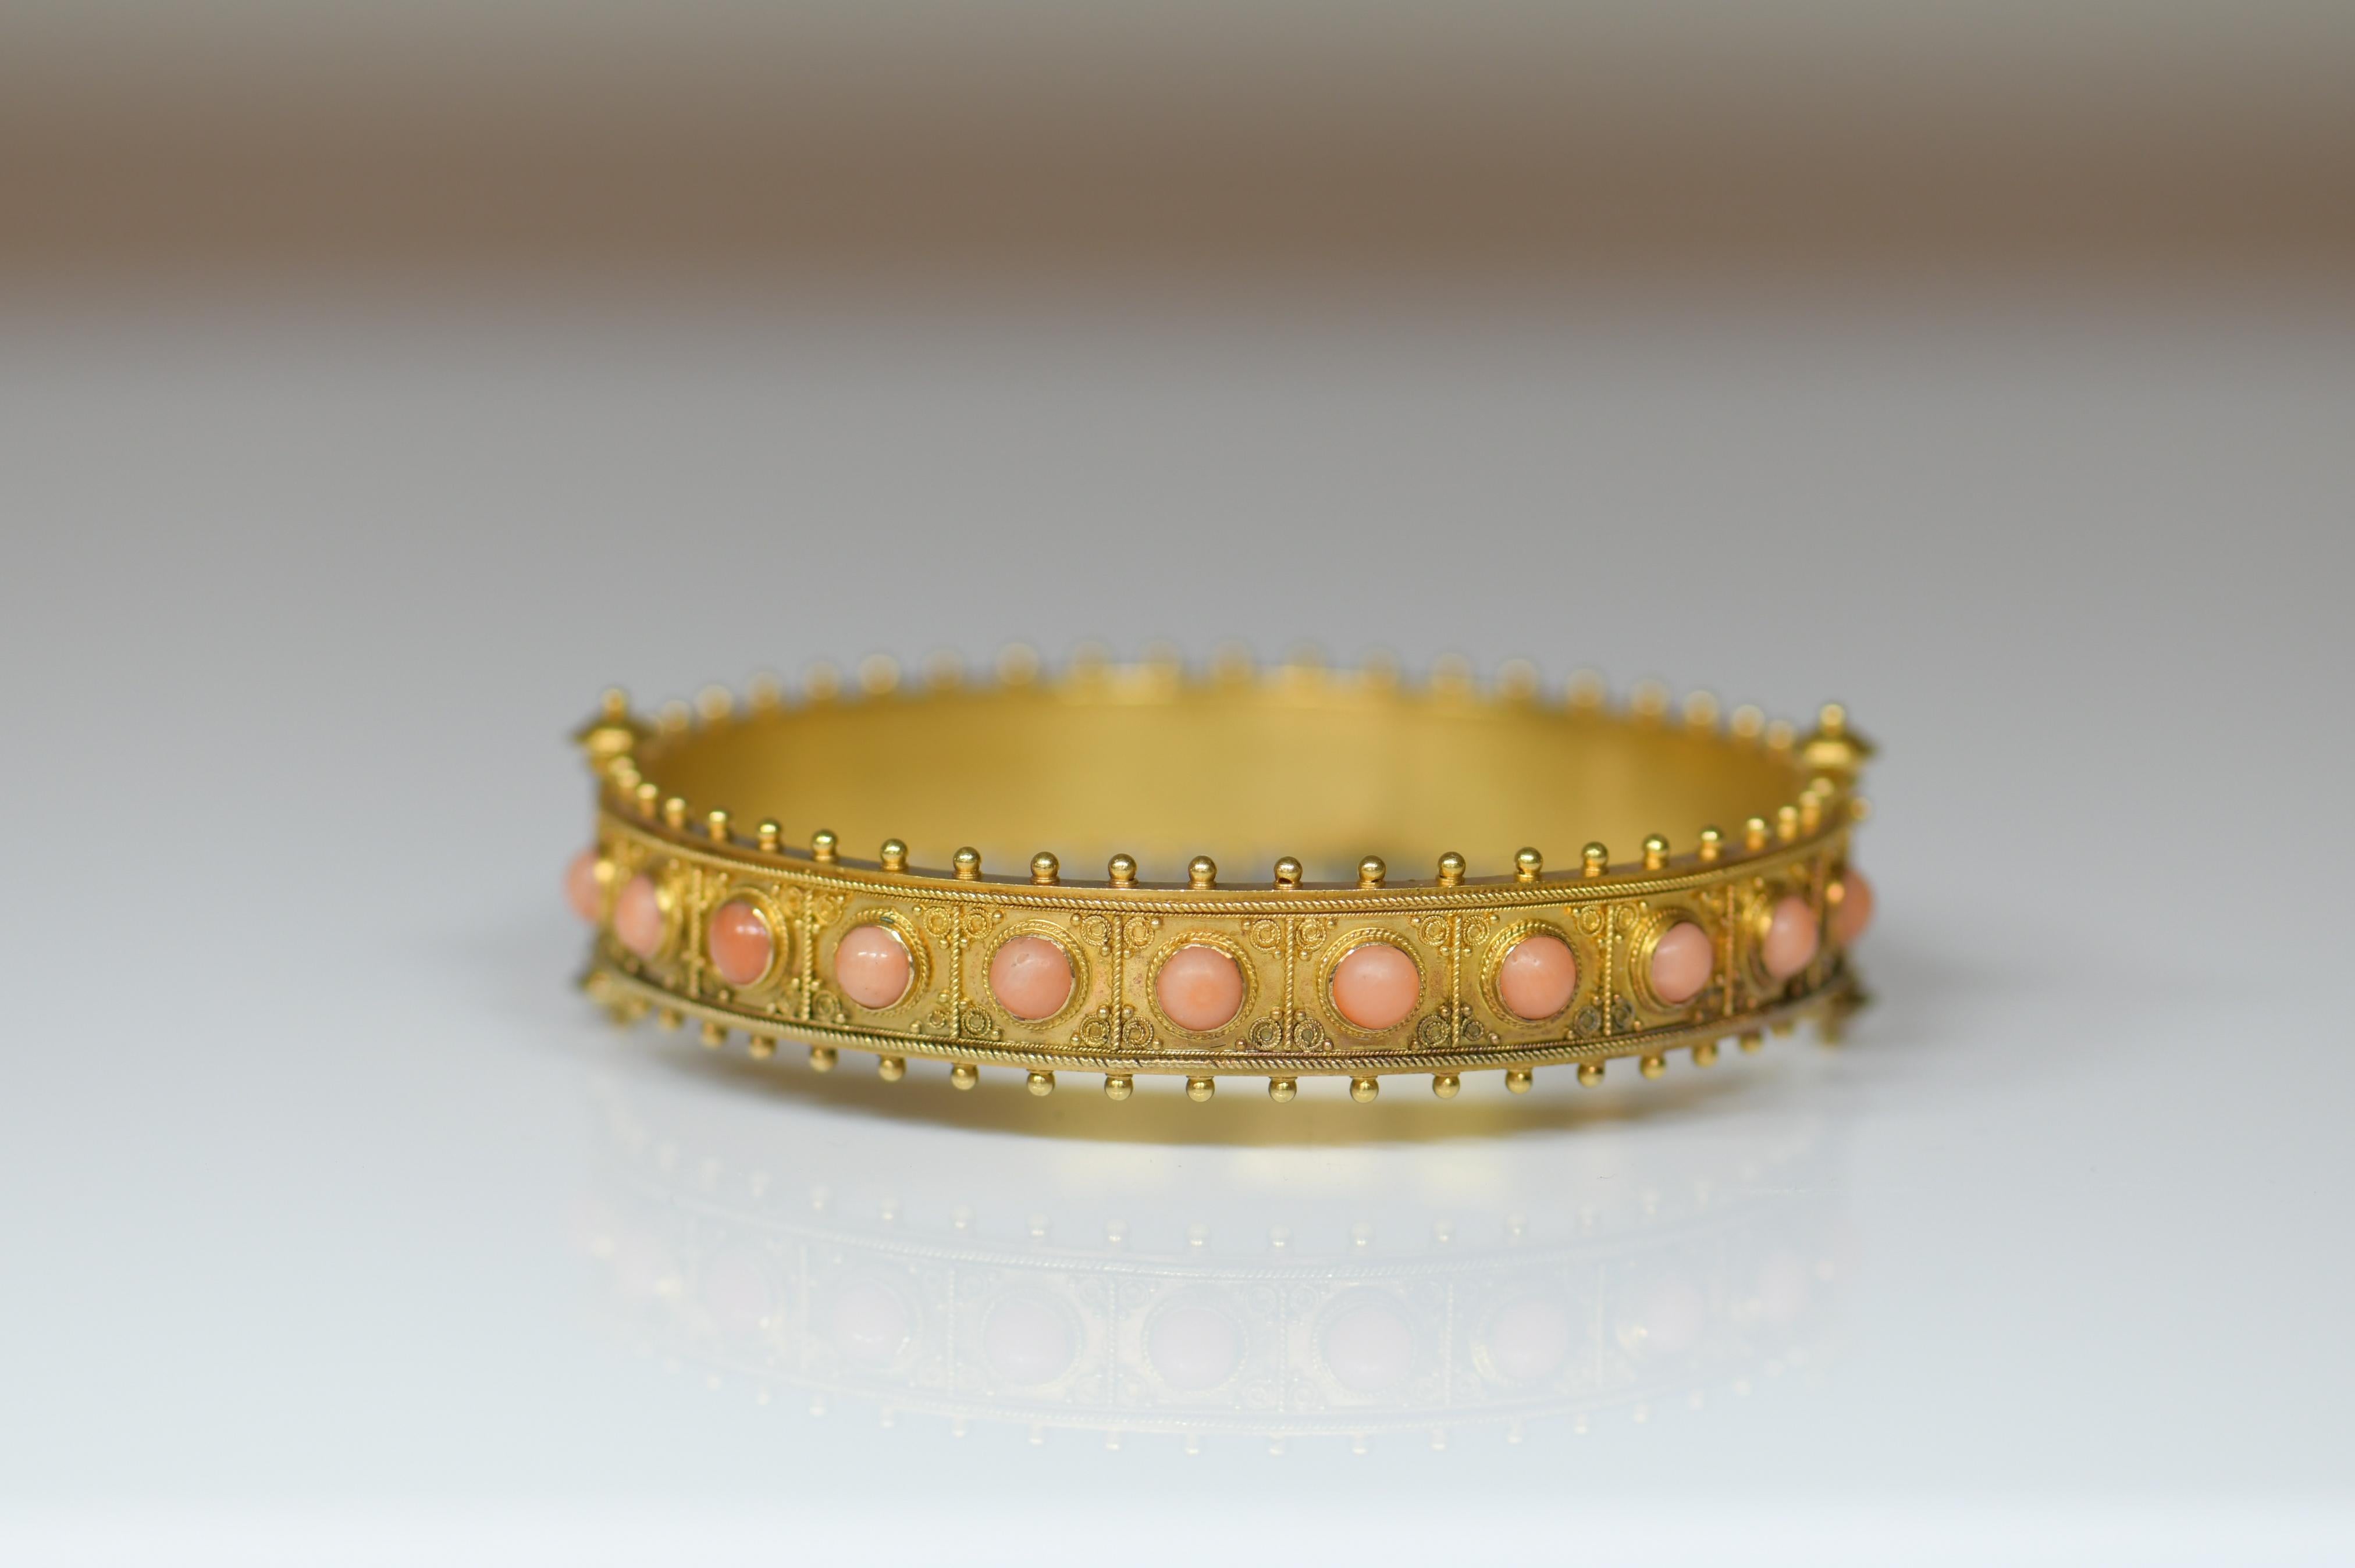 A good quality 15ct gold coral bangle that was made circa 1880. At that time there was a movement called the Etruscan Revival as many finds from the Etruscan period were being unearthed in Italy. Jewellers at the time embraced the challenge of